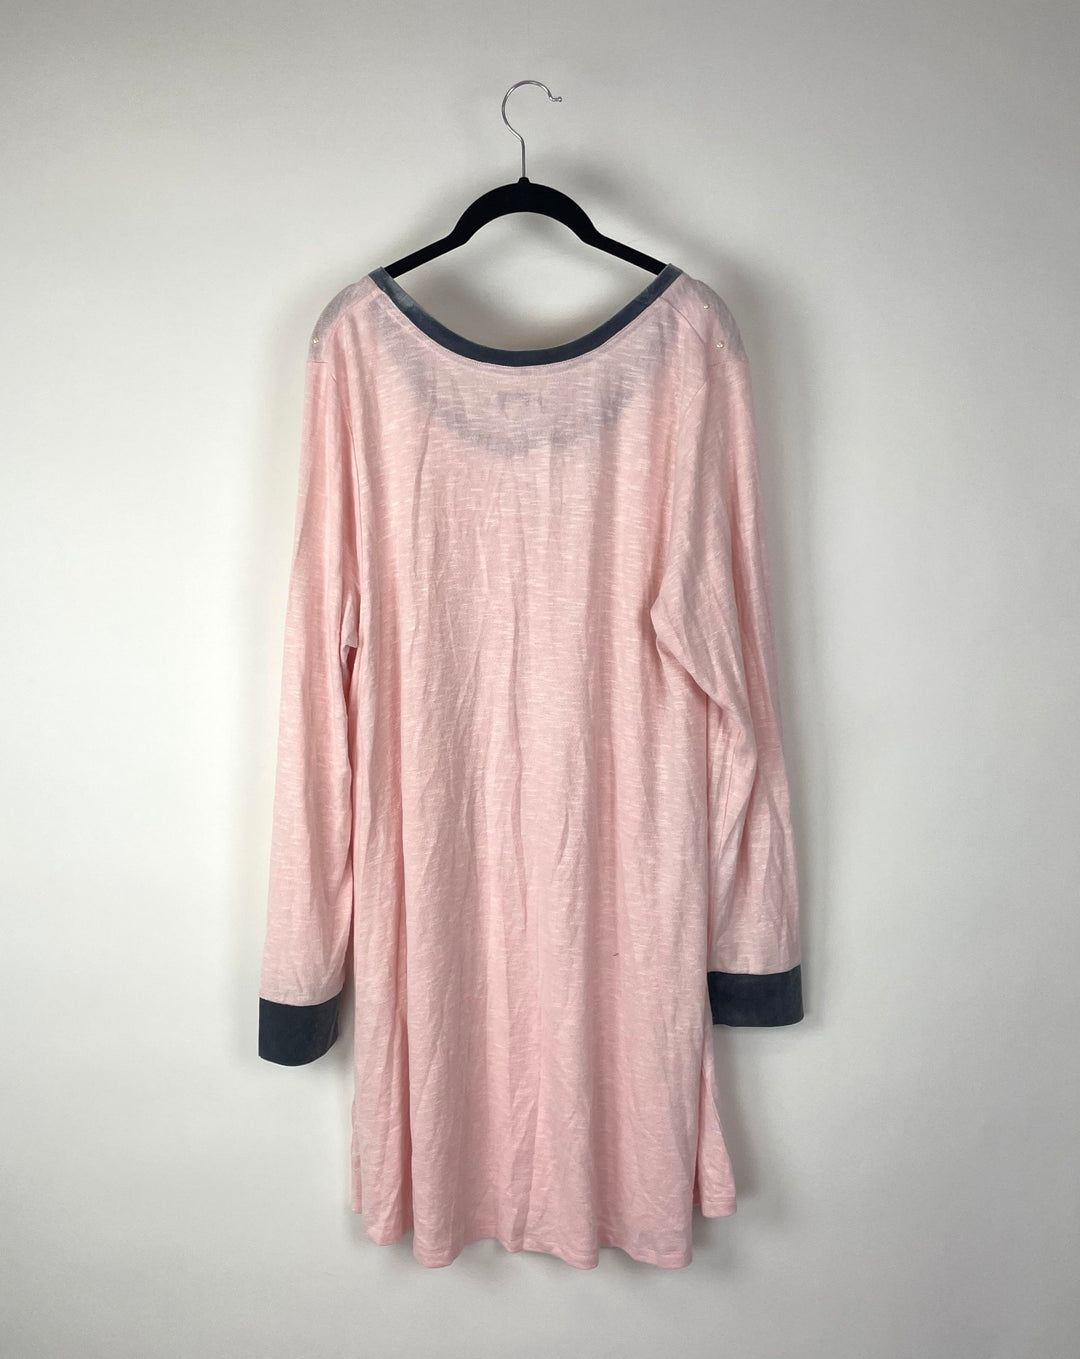 Long Sleeve Pink Nightgown - 1X